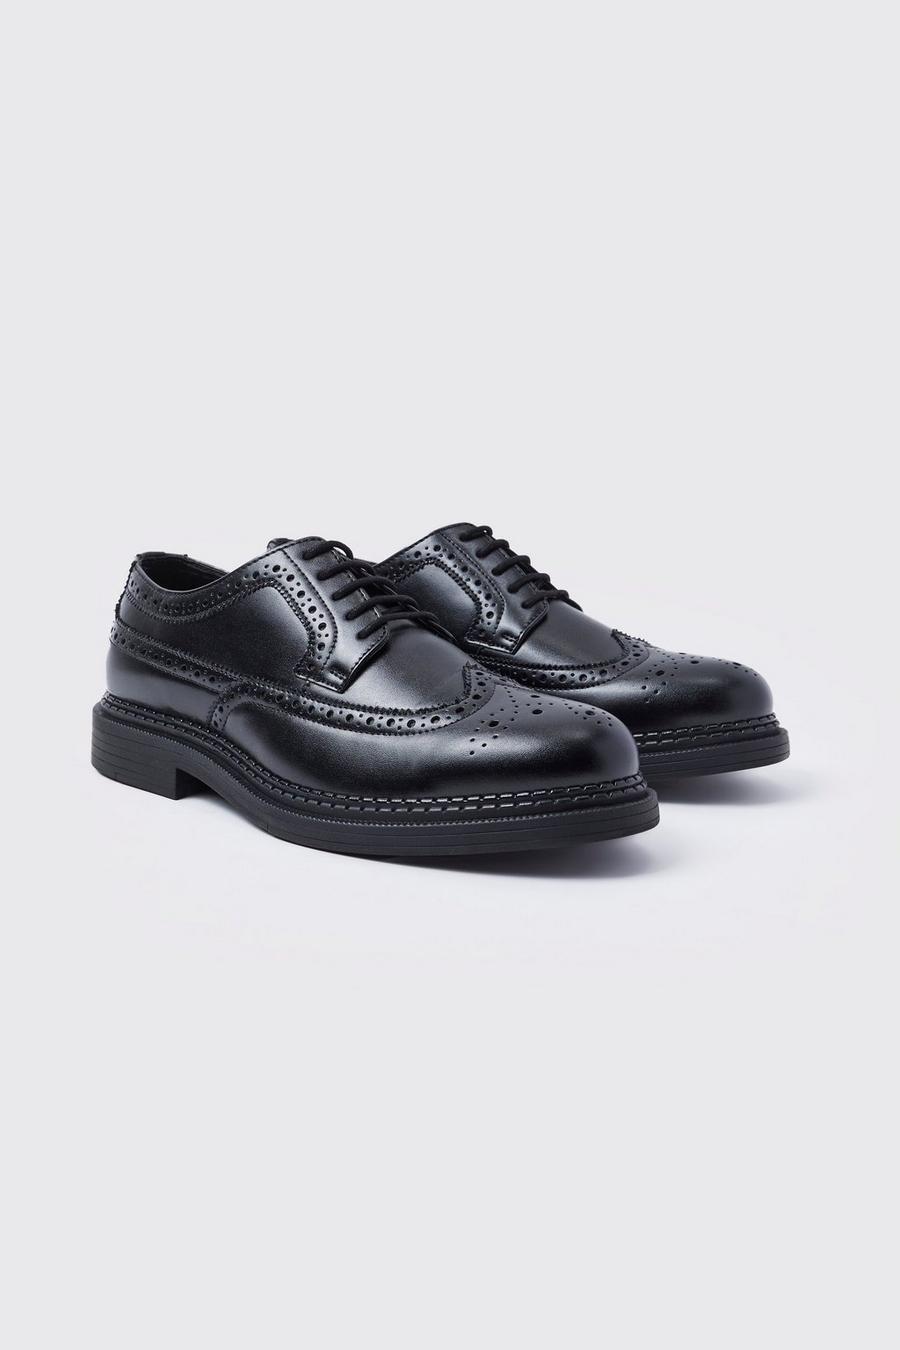 Black Classic Faux Leather Brogue